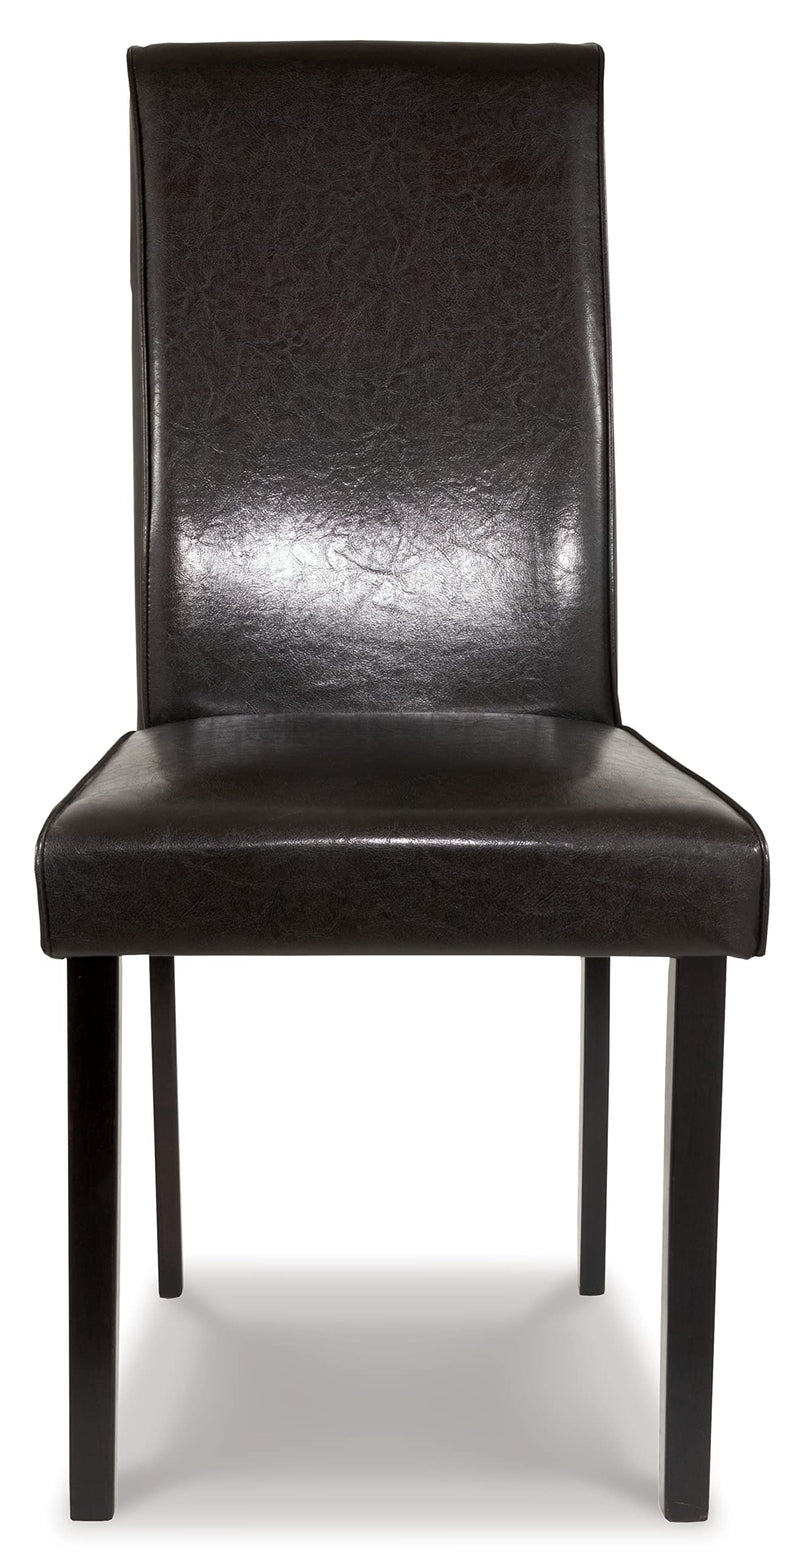 Kimonte Modern 19" Faux Leather Upholstered Armless Dining Chair, 2 Count, Dark Brown